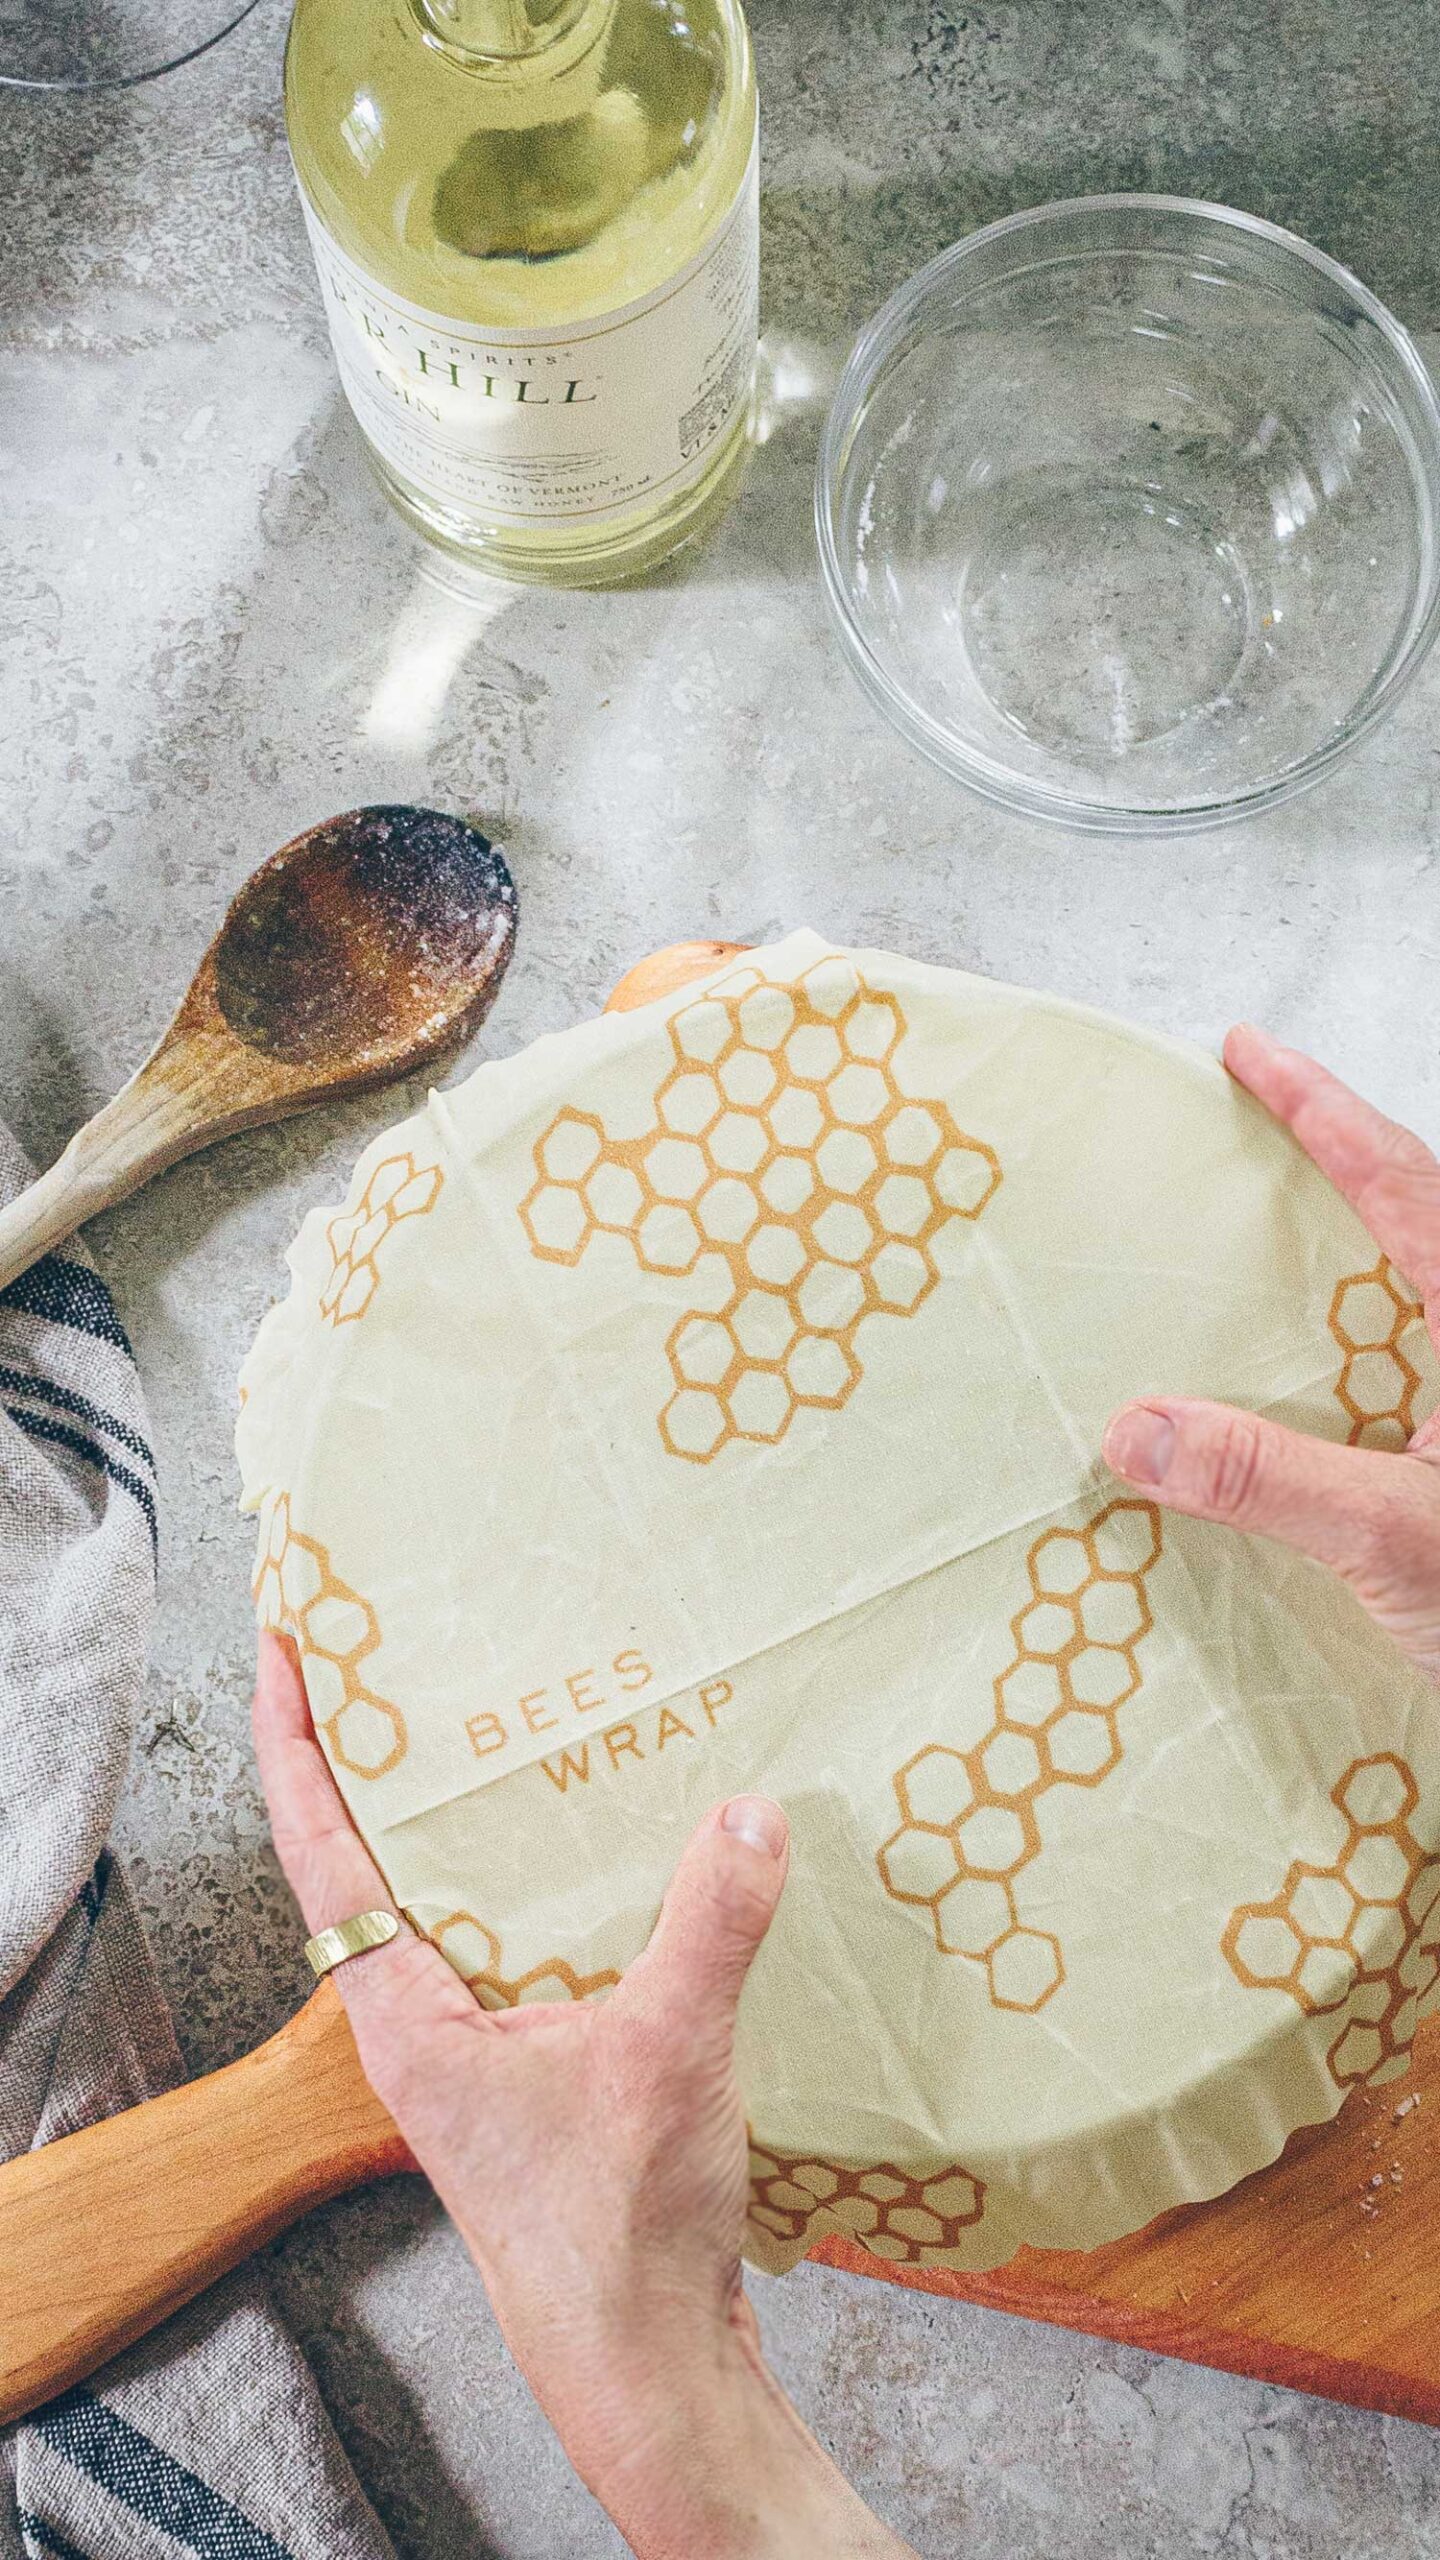 A bowl covered in Bee's Wrap